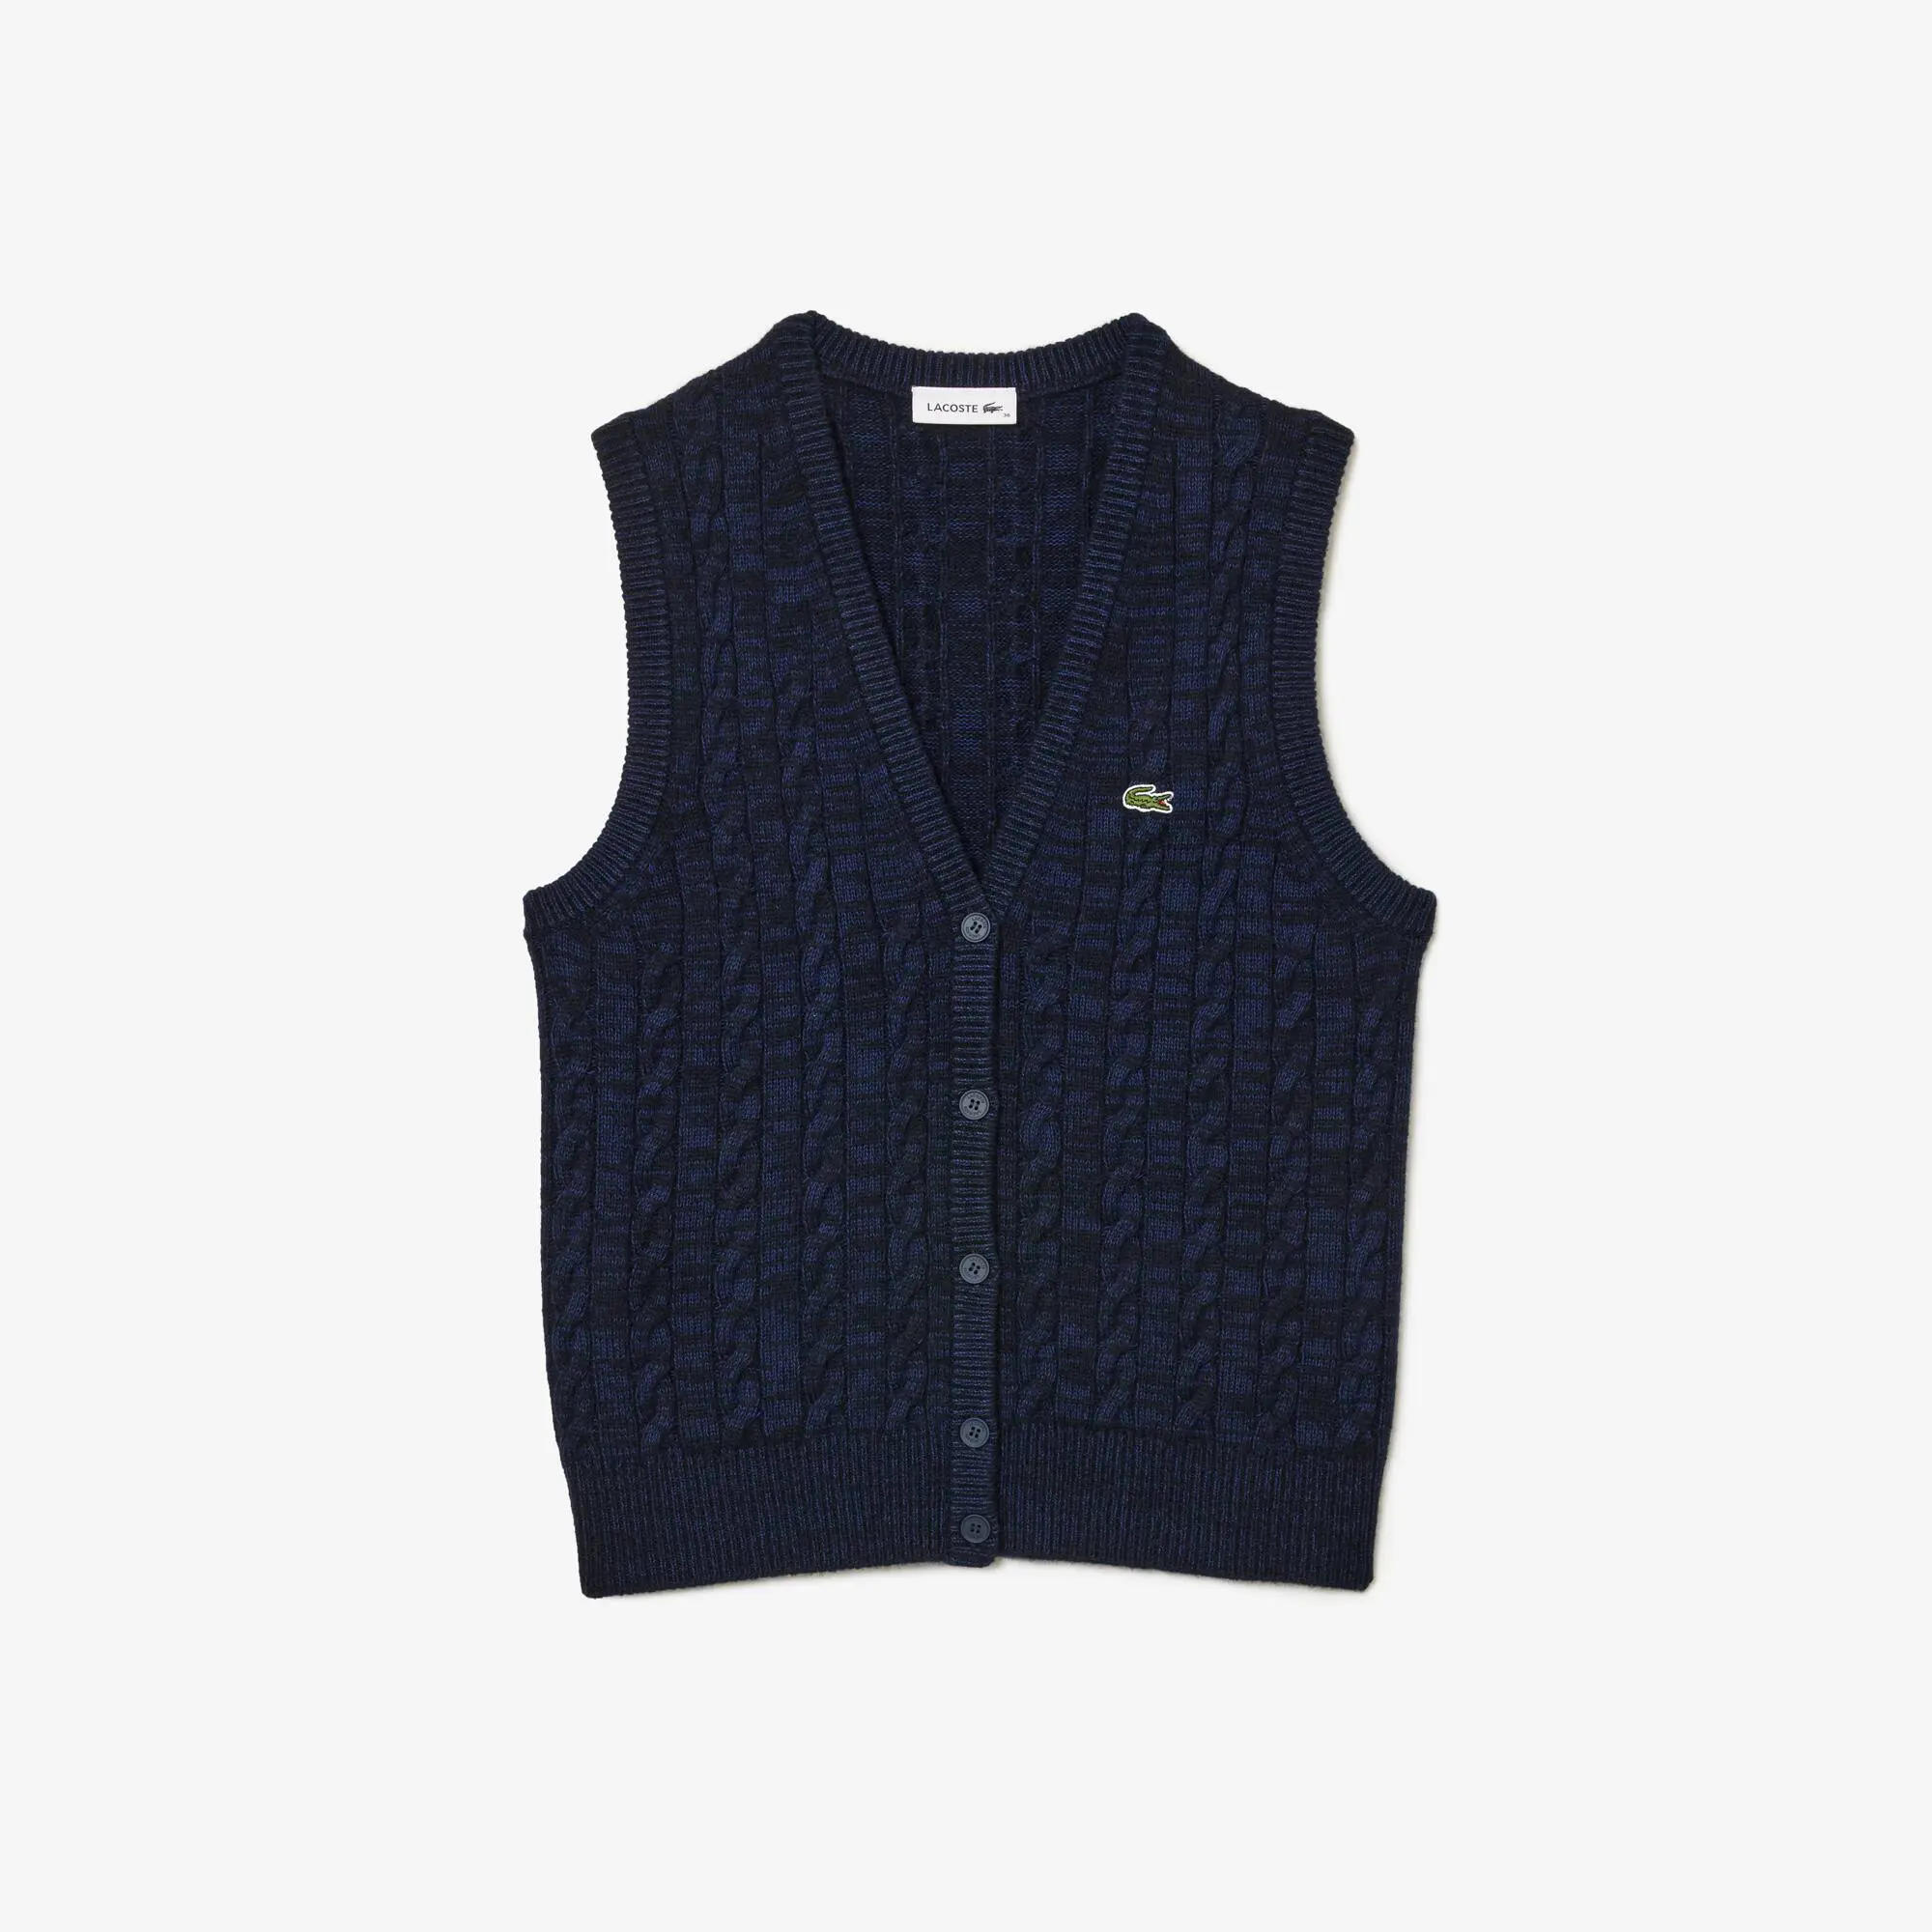 Lacoste Women's Sleeveless Cable Knit Cotton and Wool Blend Vest. 2